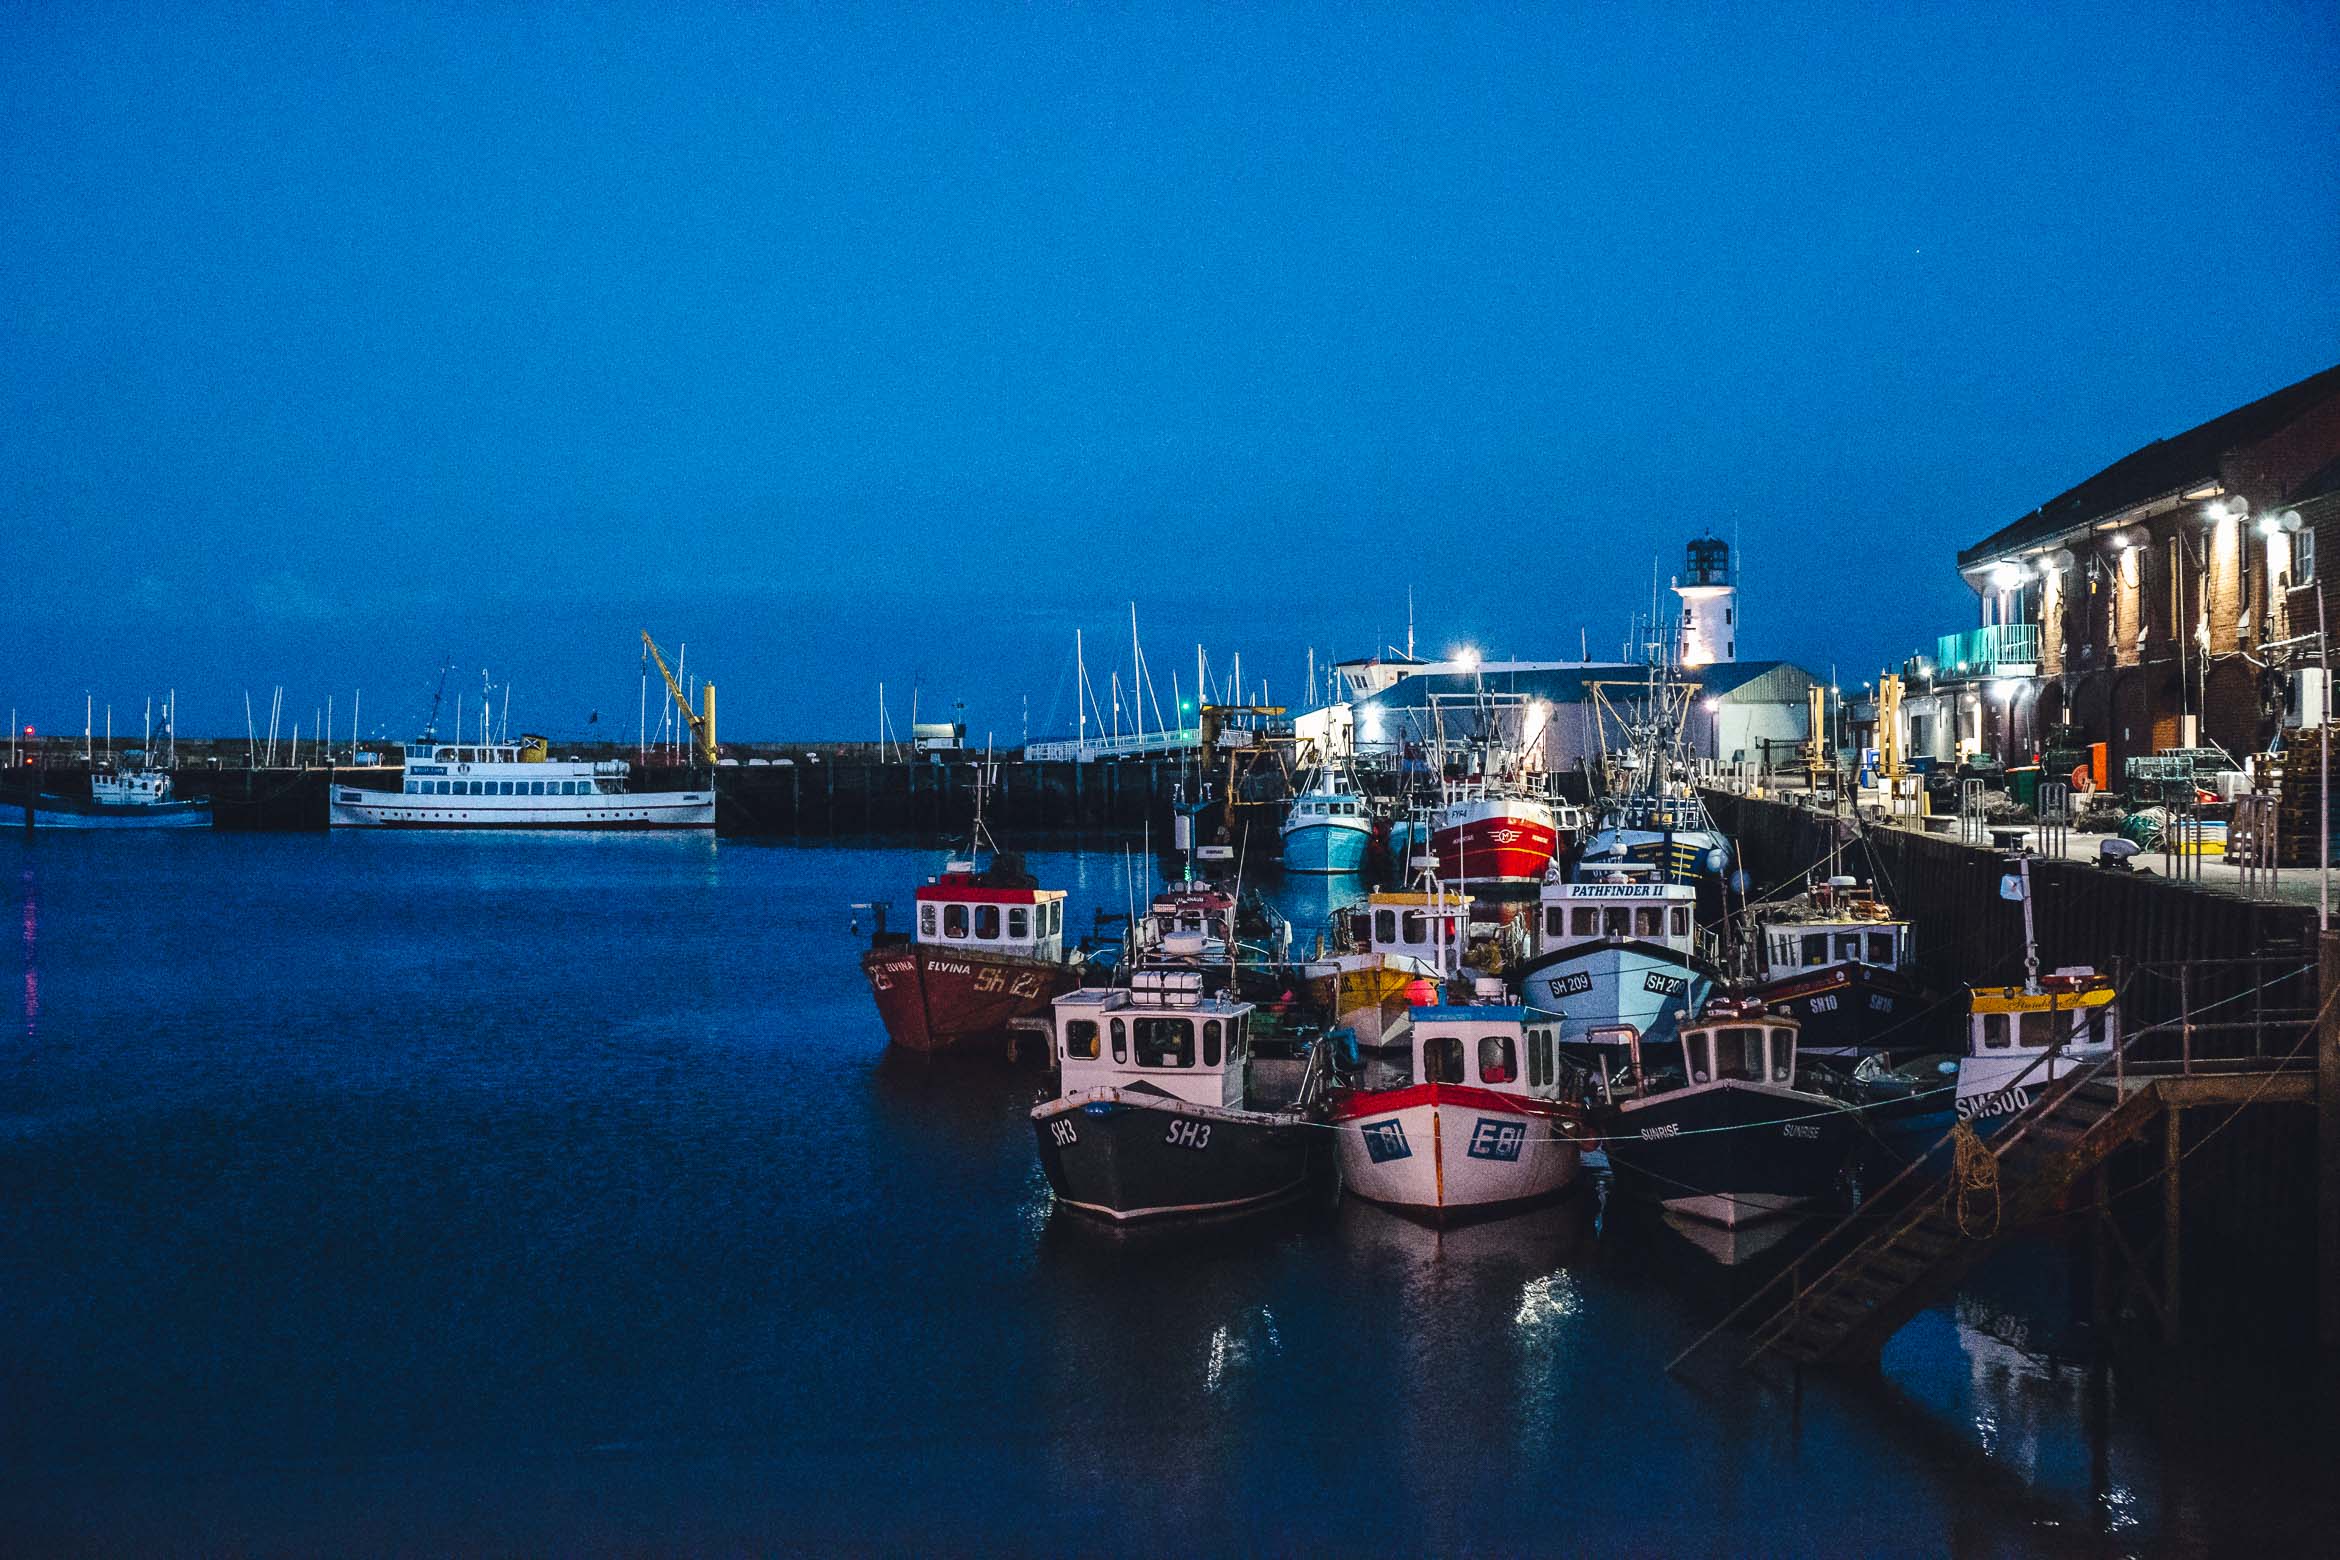 boats in harbour at night